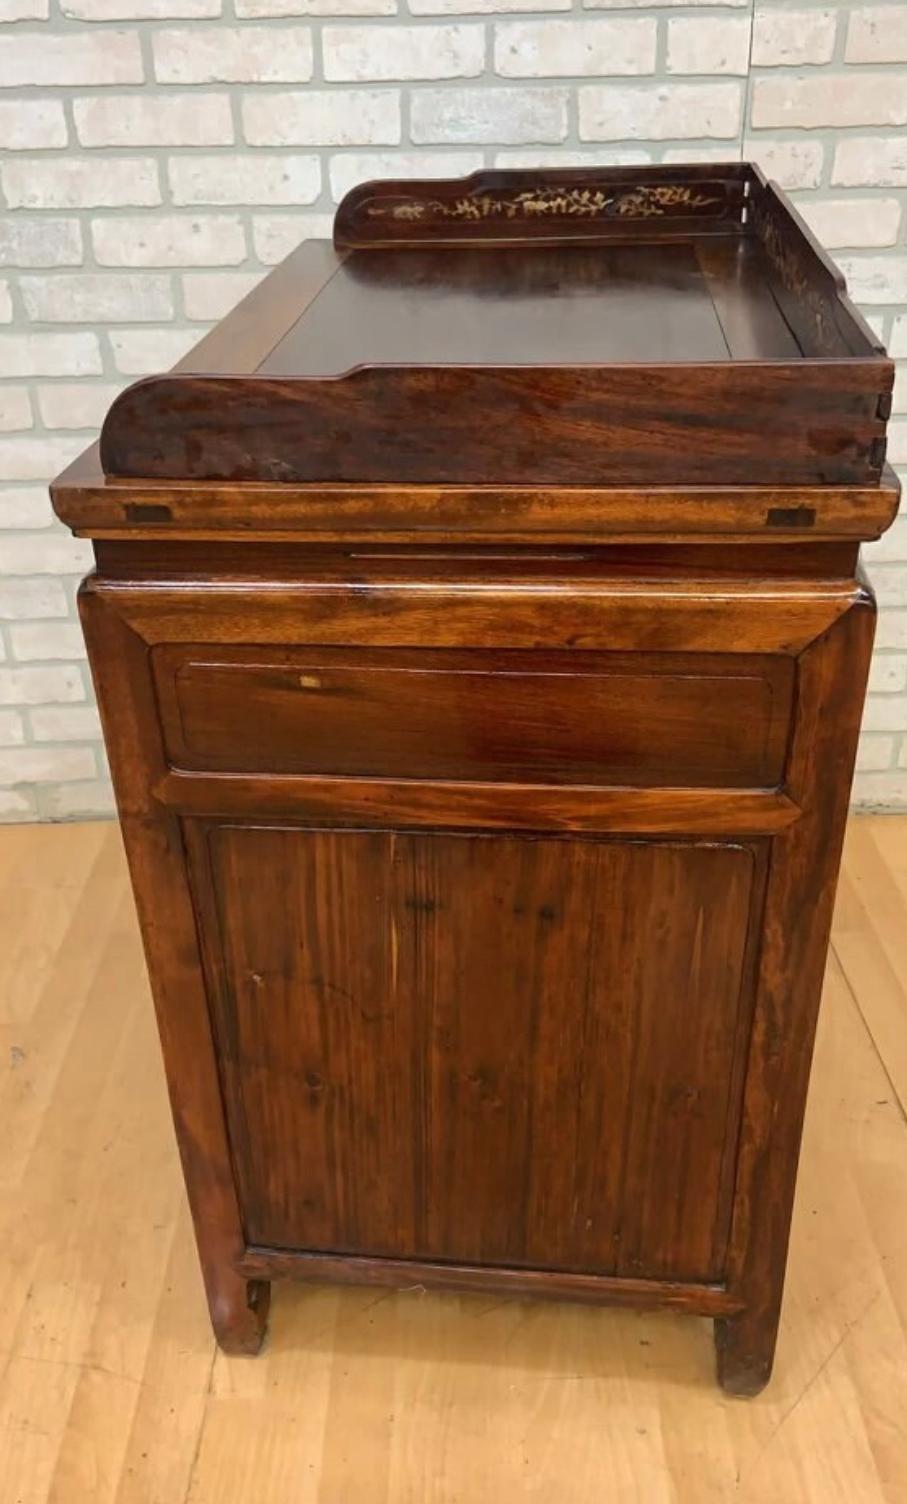 Hand-Carved Antique Chinese Jiangsu Province Rosewood with Bone Inlay Sideboard Cabinet For Sale